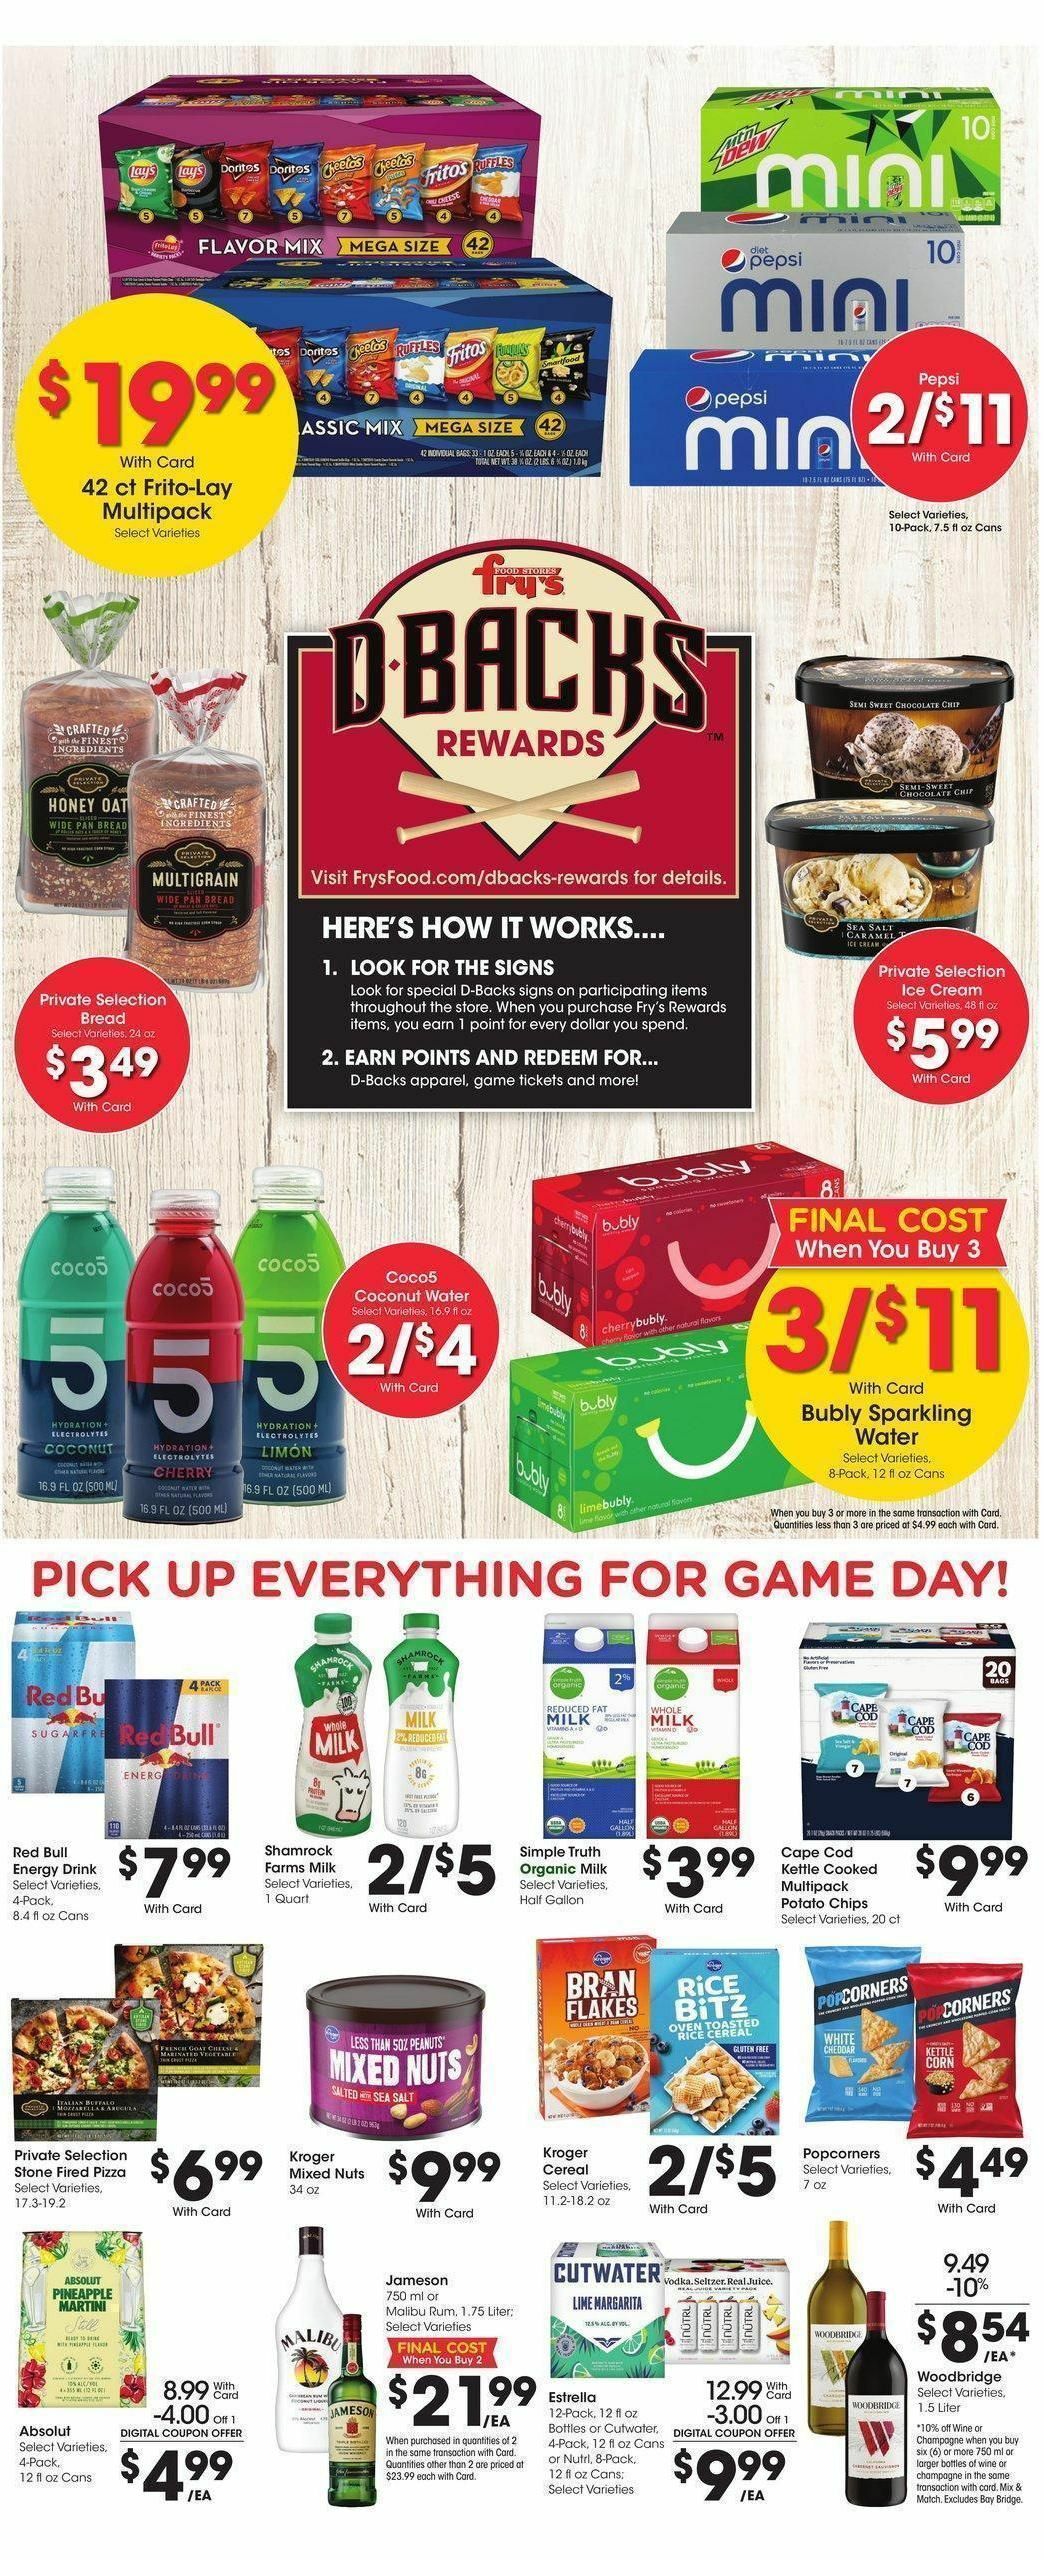 Fry's Food Weekly Ad from June 21